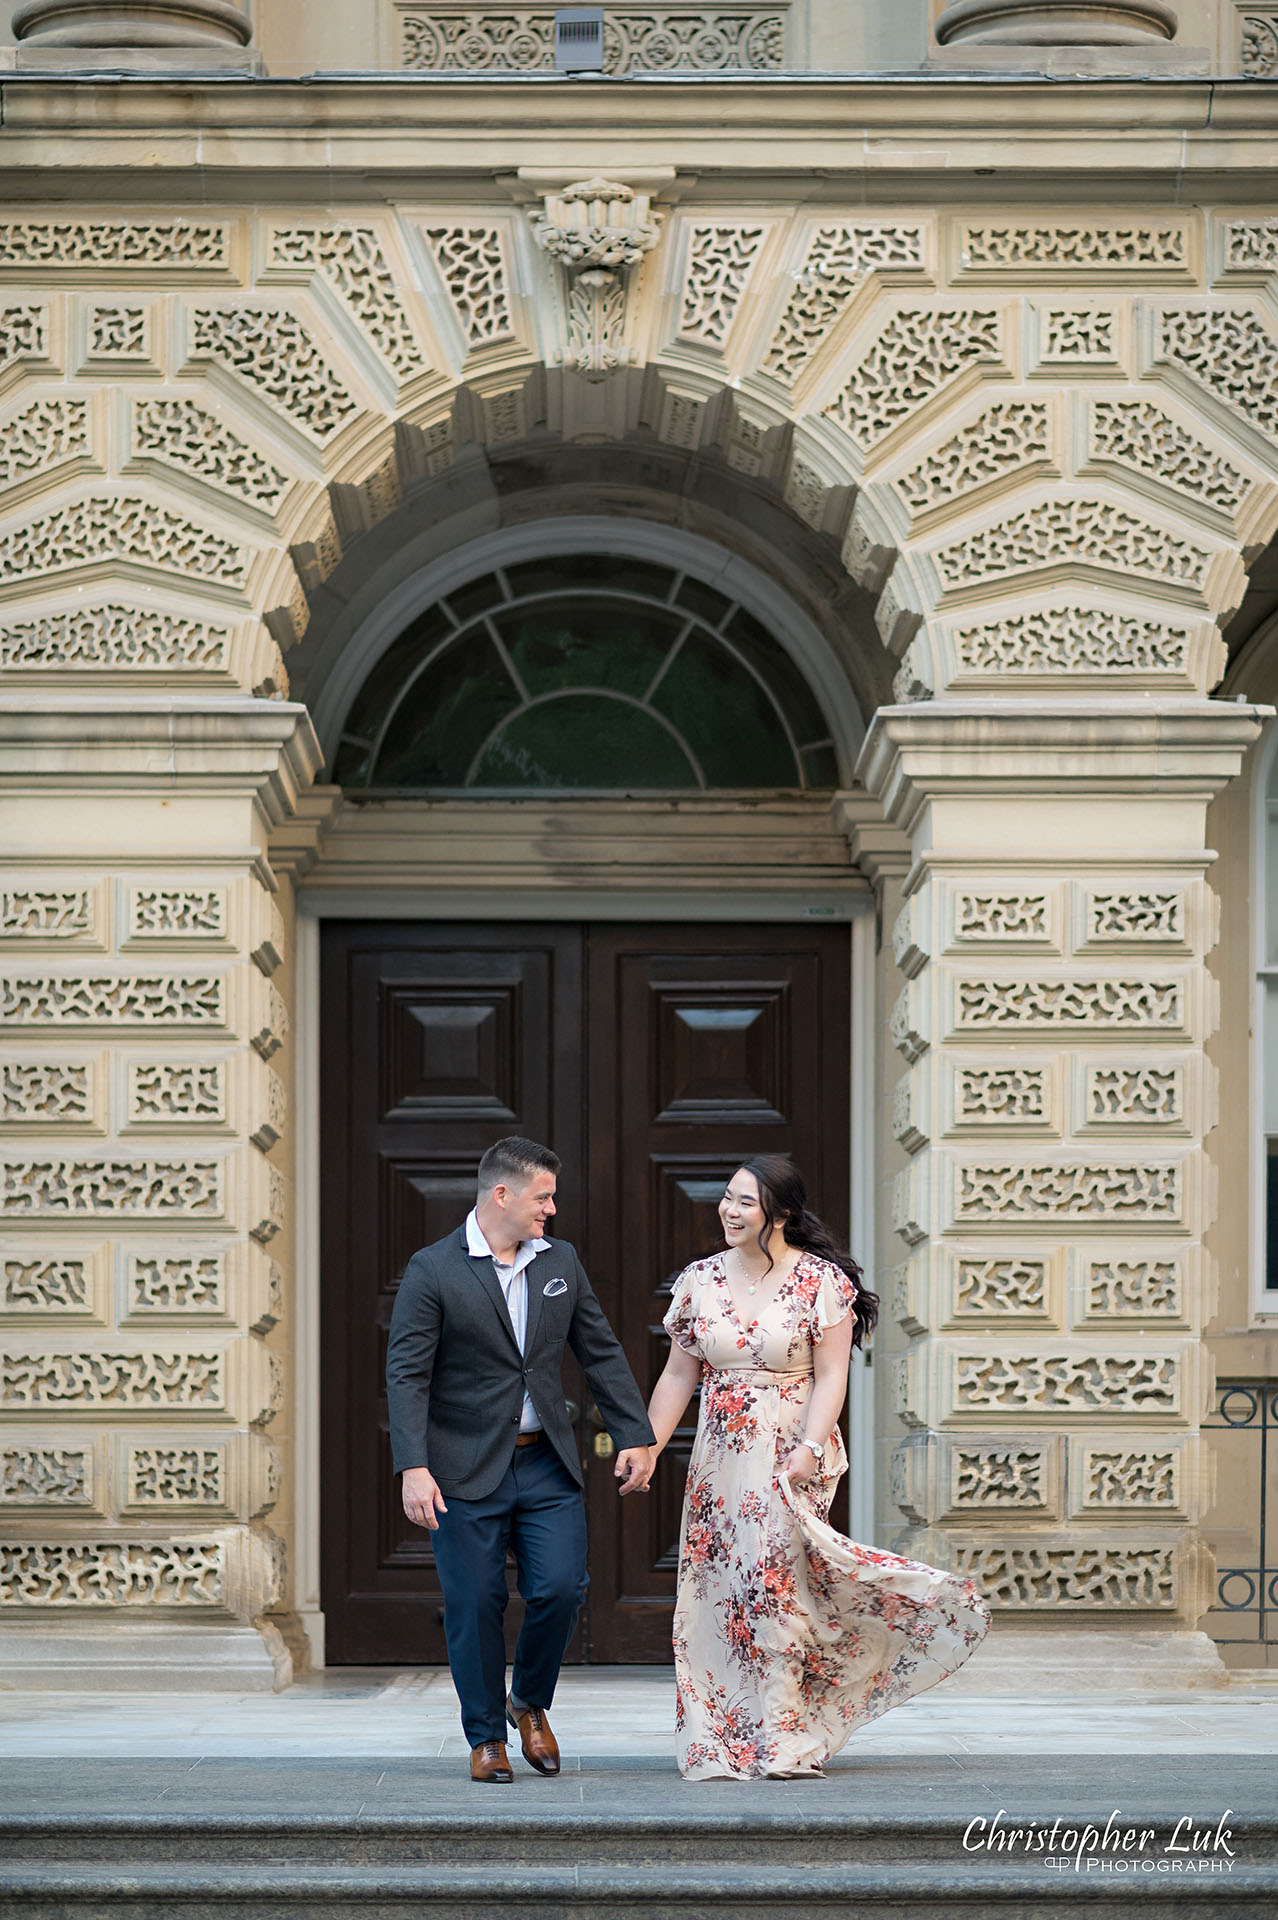 Christopher Luk Toronto Wedding Photographer Engagement Photos Pictures Session Osgoode Hall Nathan Philips Square City Hall Bride Groom Natural Candid Photojournalistic Organic Sunset Holding Hands Walking Together Stairs Steps Portrait